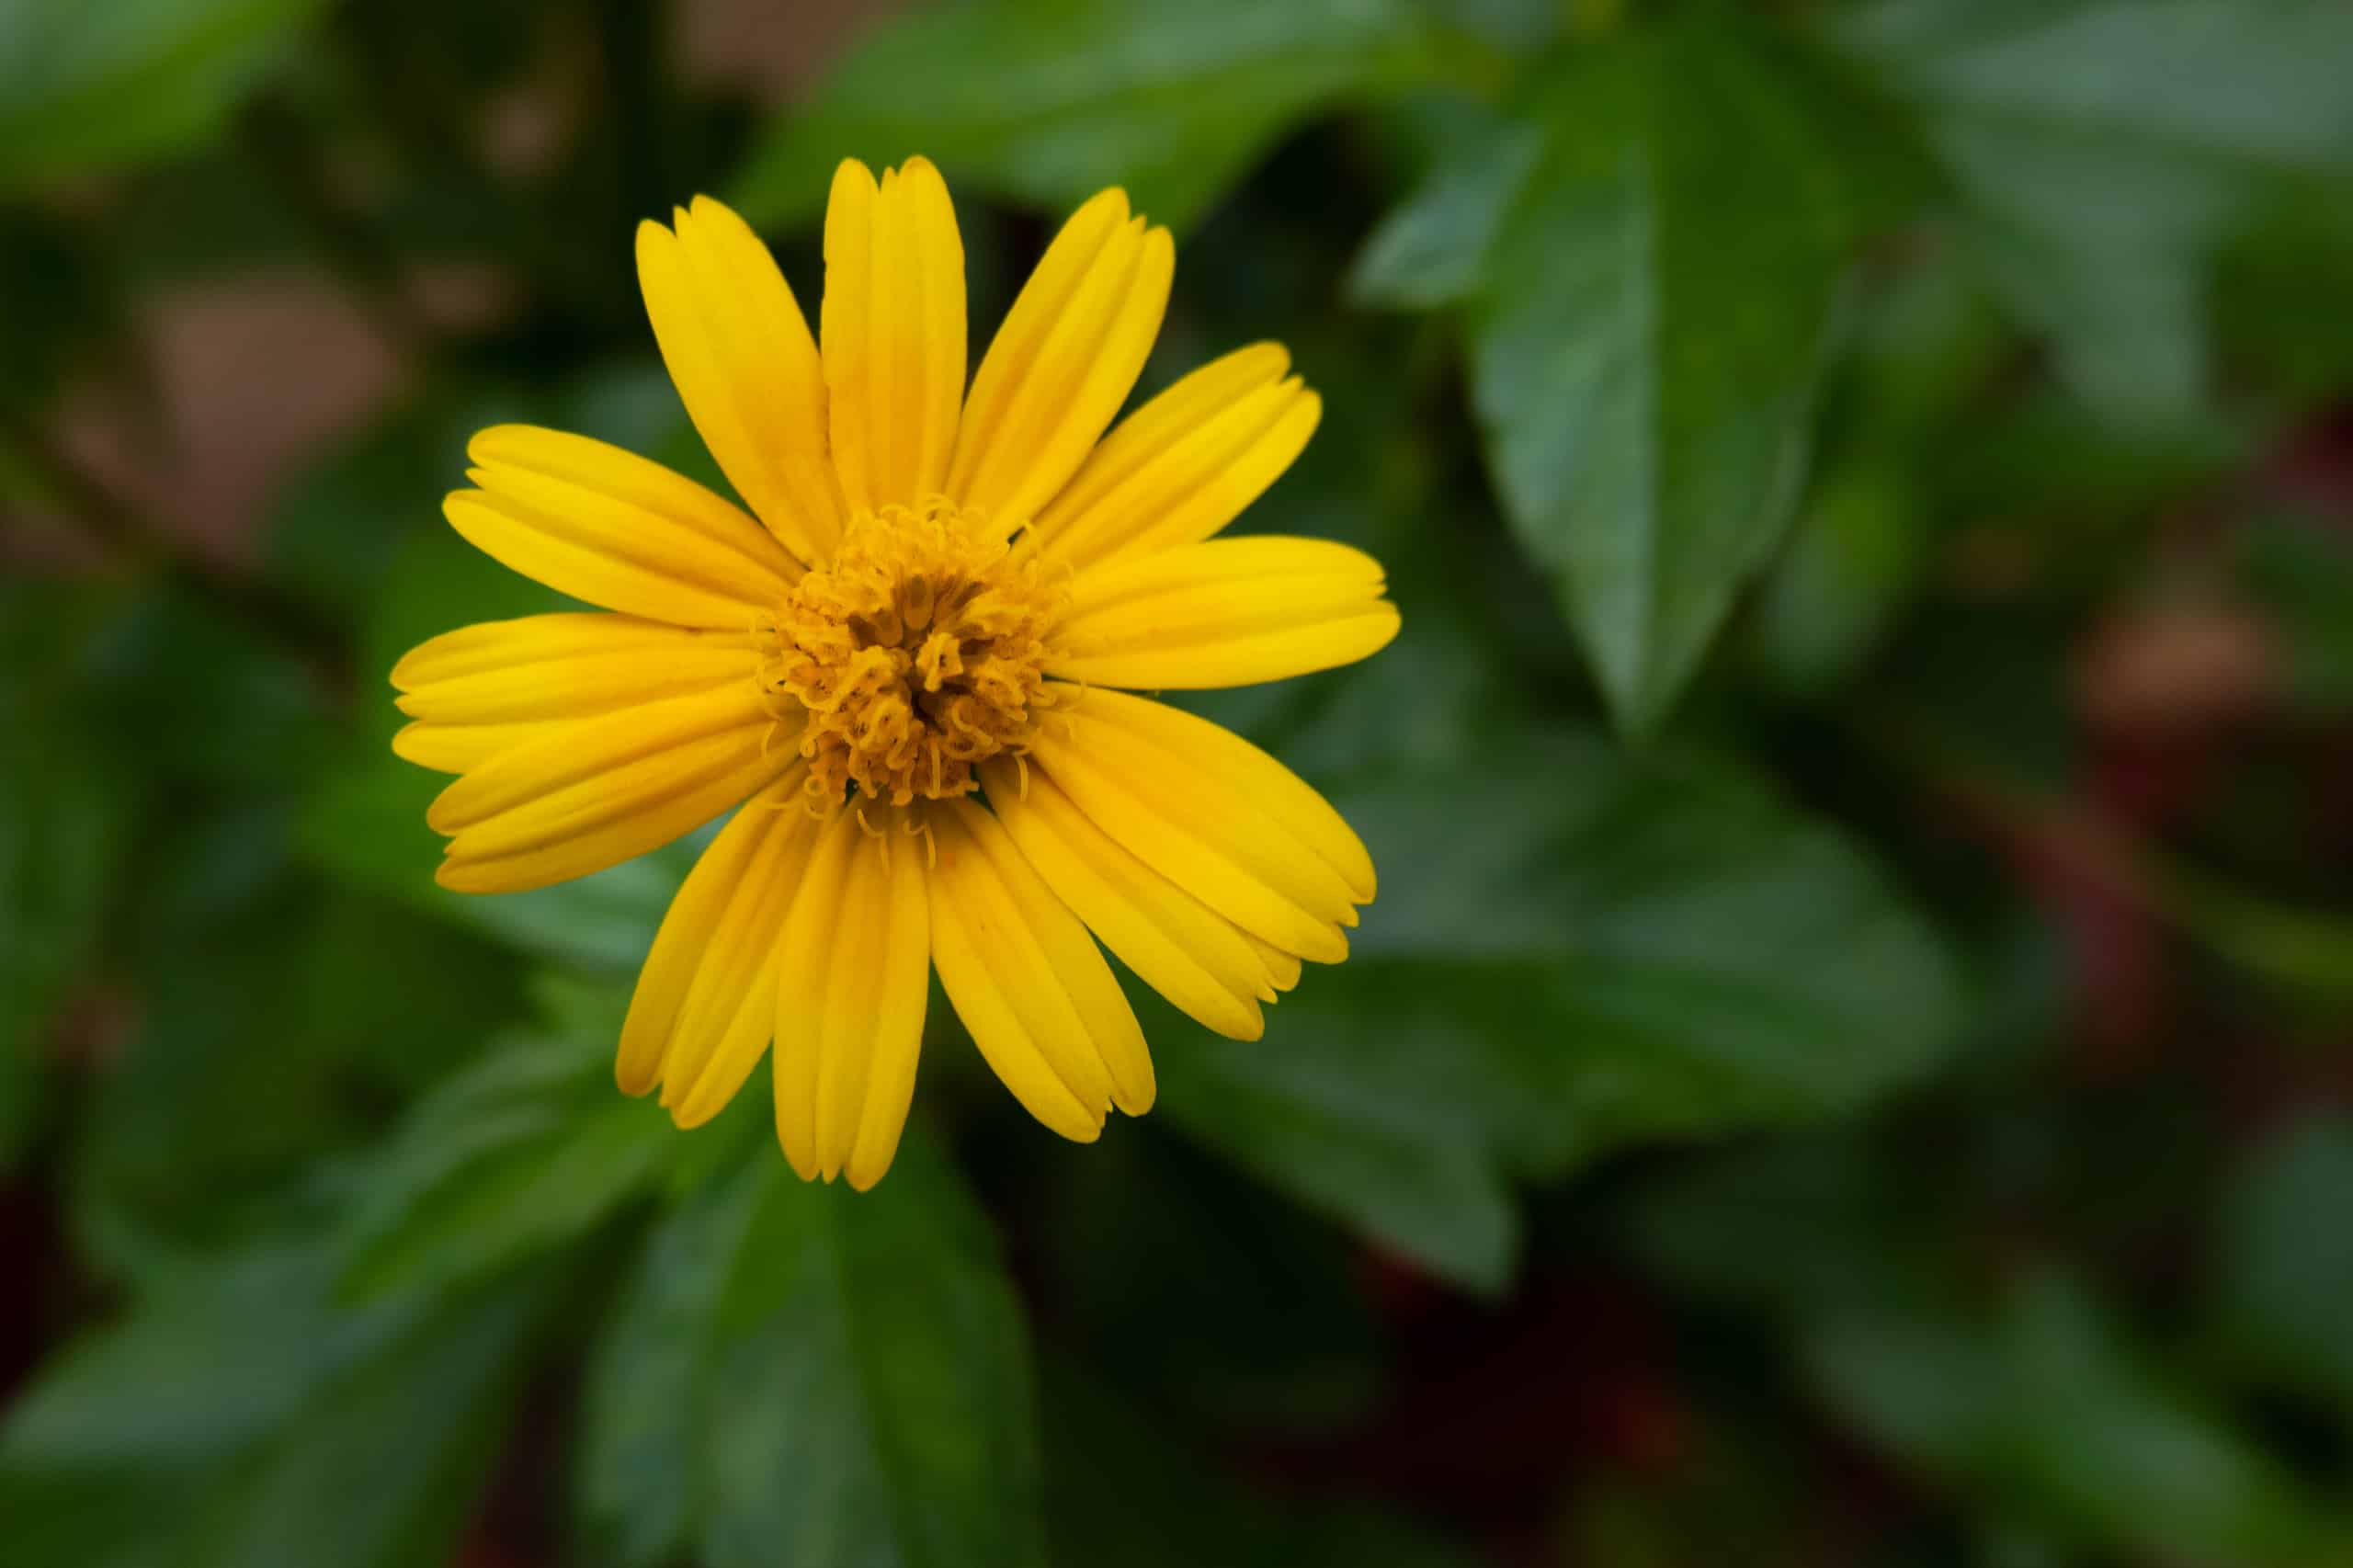 Can Arnica Help Soothe Your Back Pain?